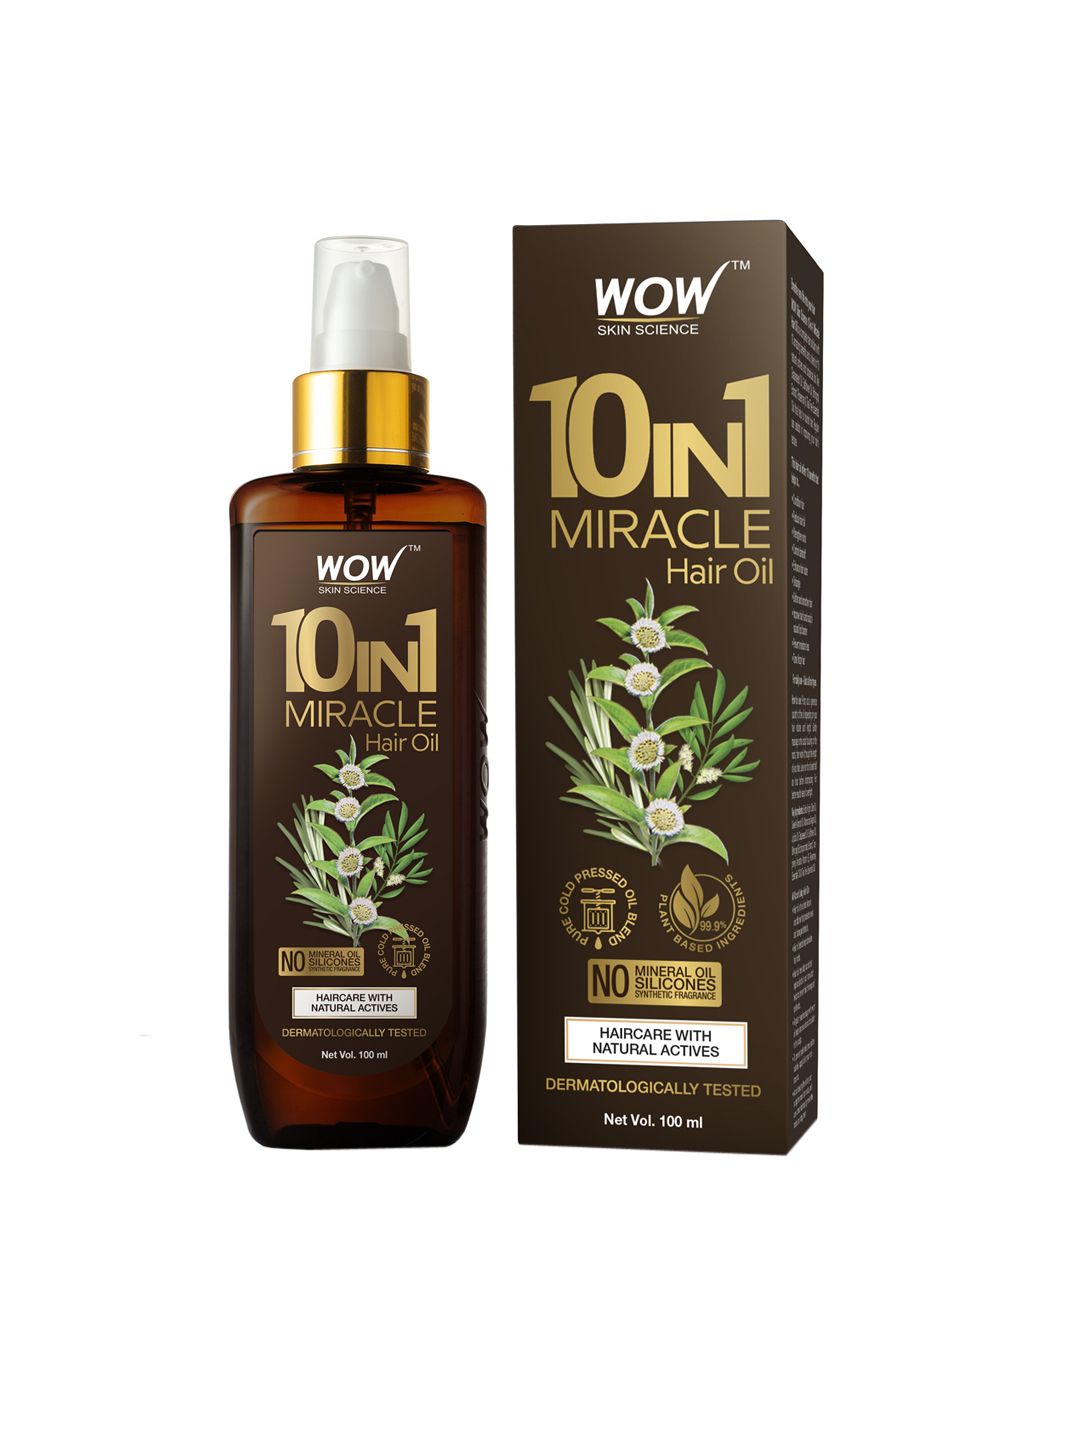 WOW SKIN SCIENCE 10 in 1 Pure Cold Pressed Miracle Hair Oil - 100 ml Price in India